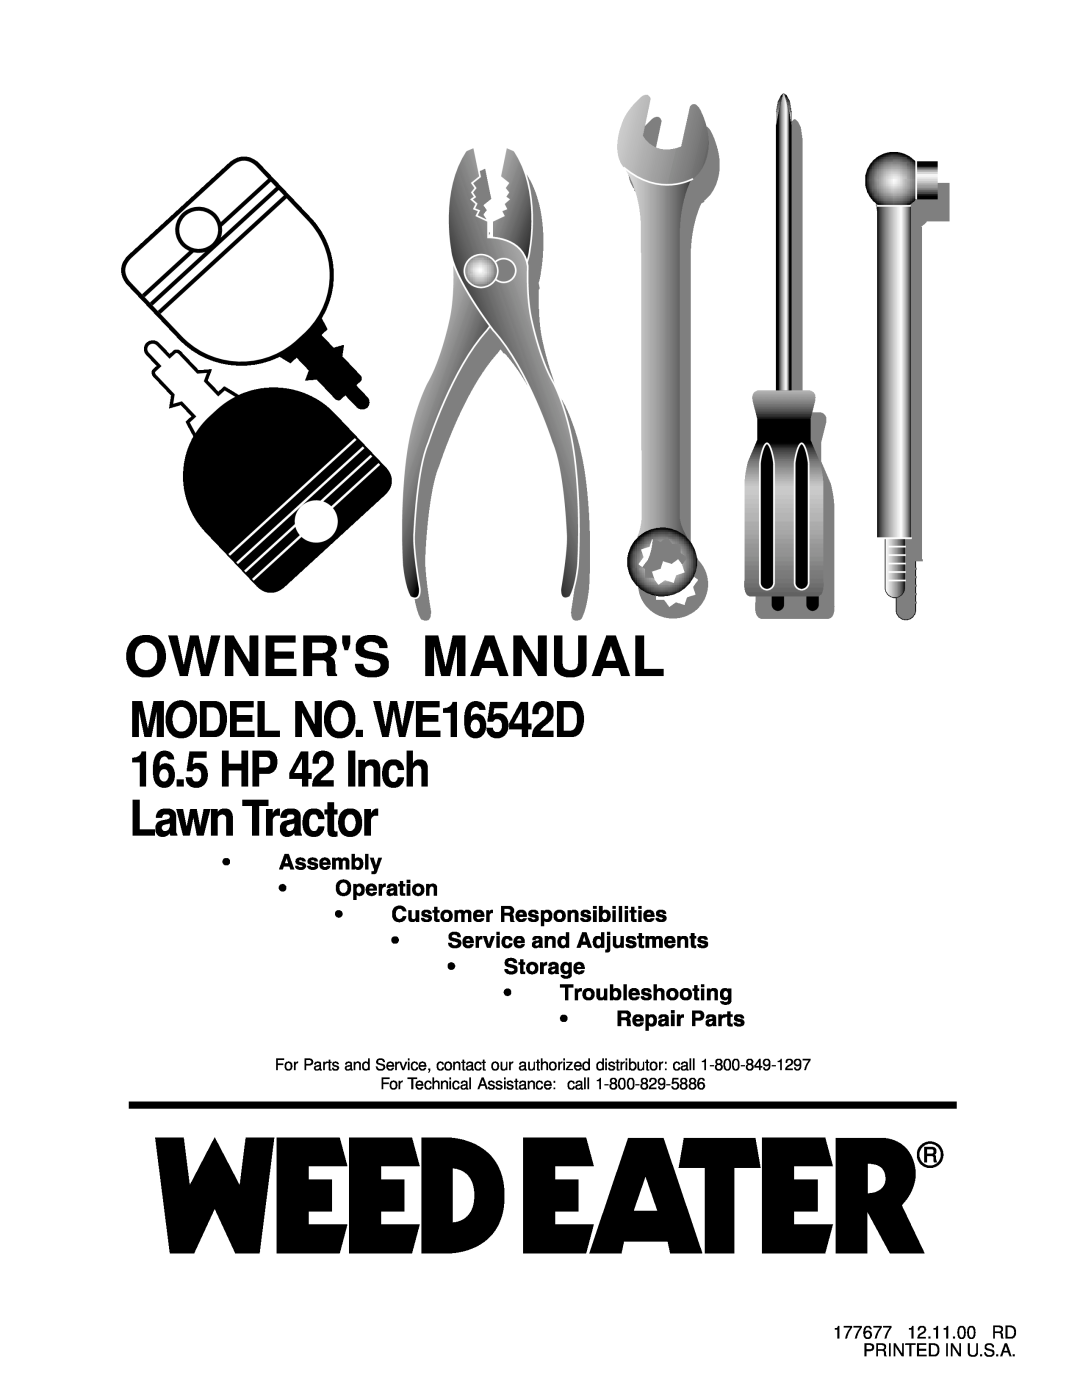 Weed Eater owner manual MODEL NO. WE16542D 16.5 HP 42 Inch Lawn Tractor 